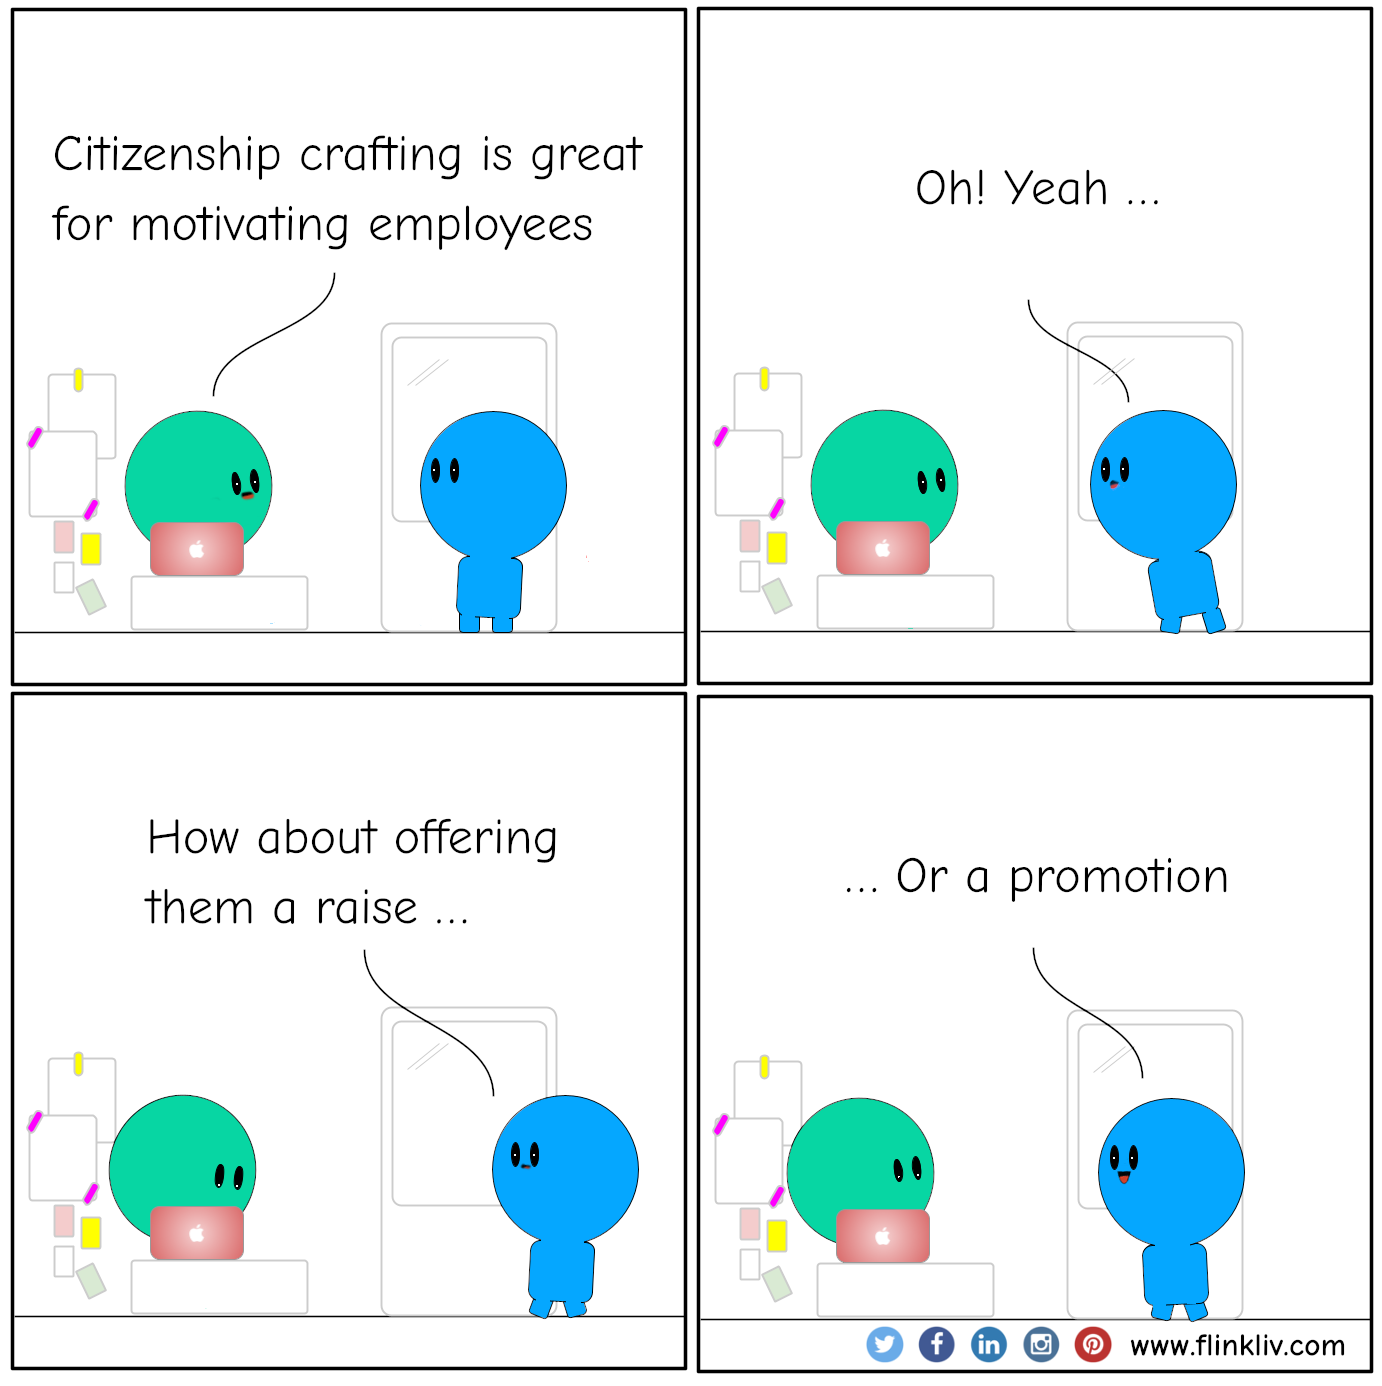 Conversation between A and B about how to motivate employees A: Citizenship crafting is great for motivating employees. B: Oh! Yeah B: How about offering them a raise, B: or a promotion, which is better for motivation. By flinkliv.com